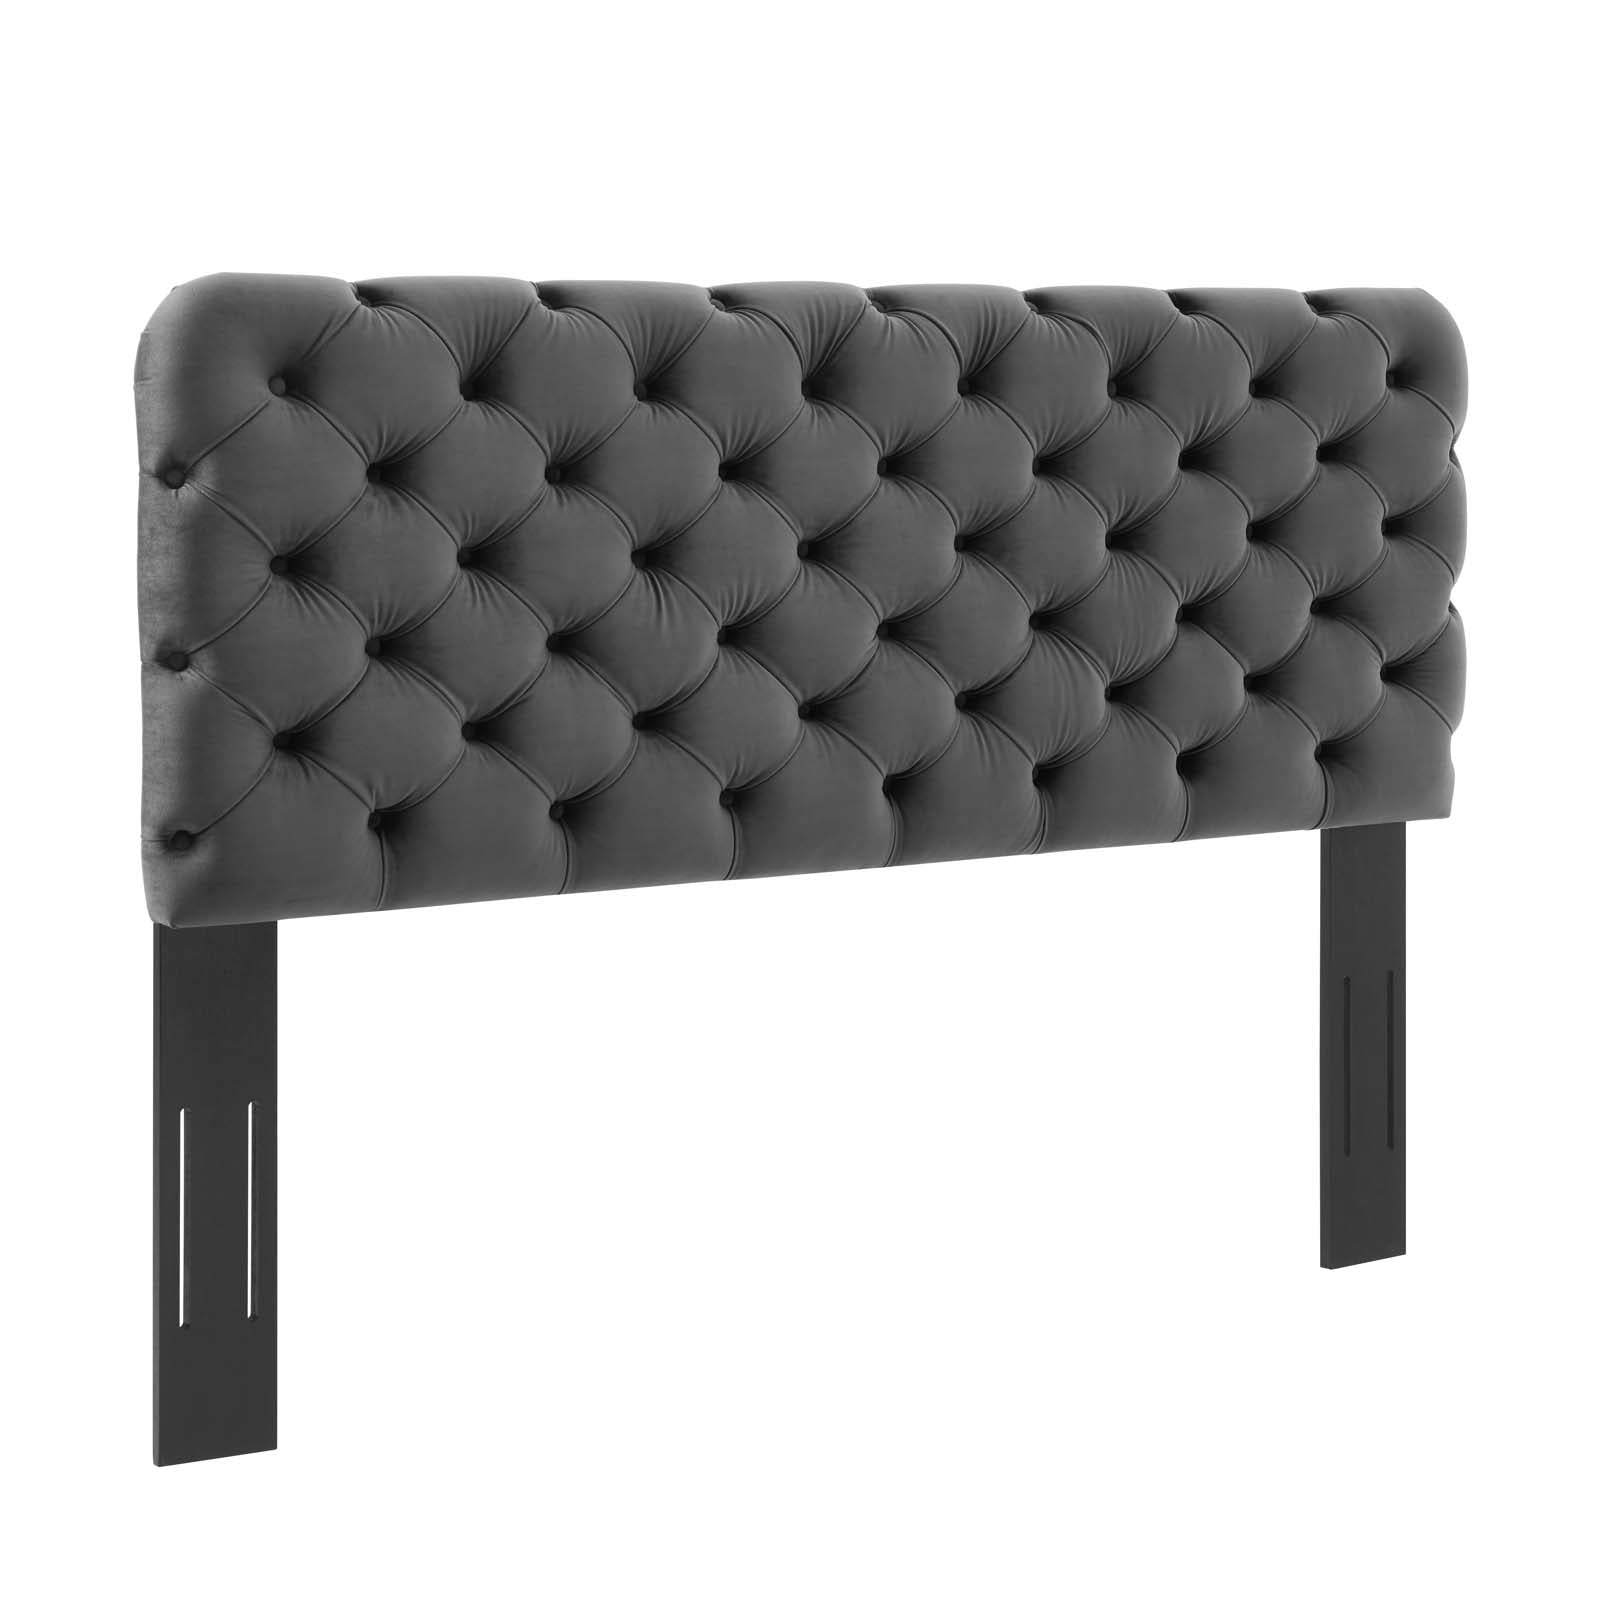 Modway Headboards - Lizzy Tufted Full/Queen Performance Velvet Headboard Charcoal